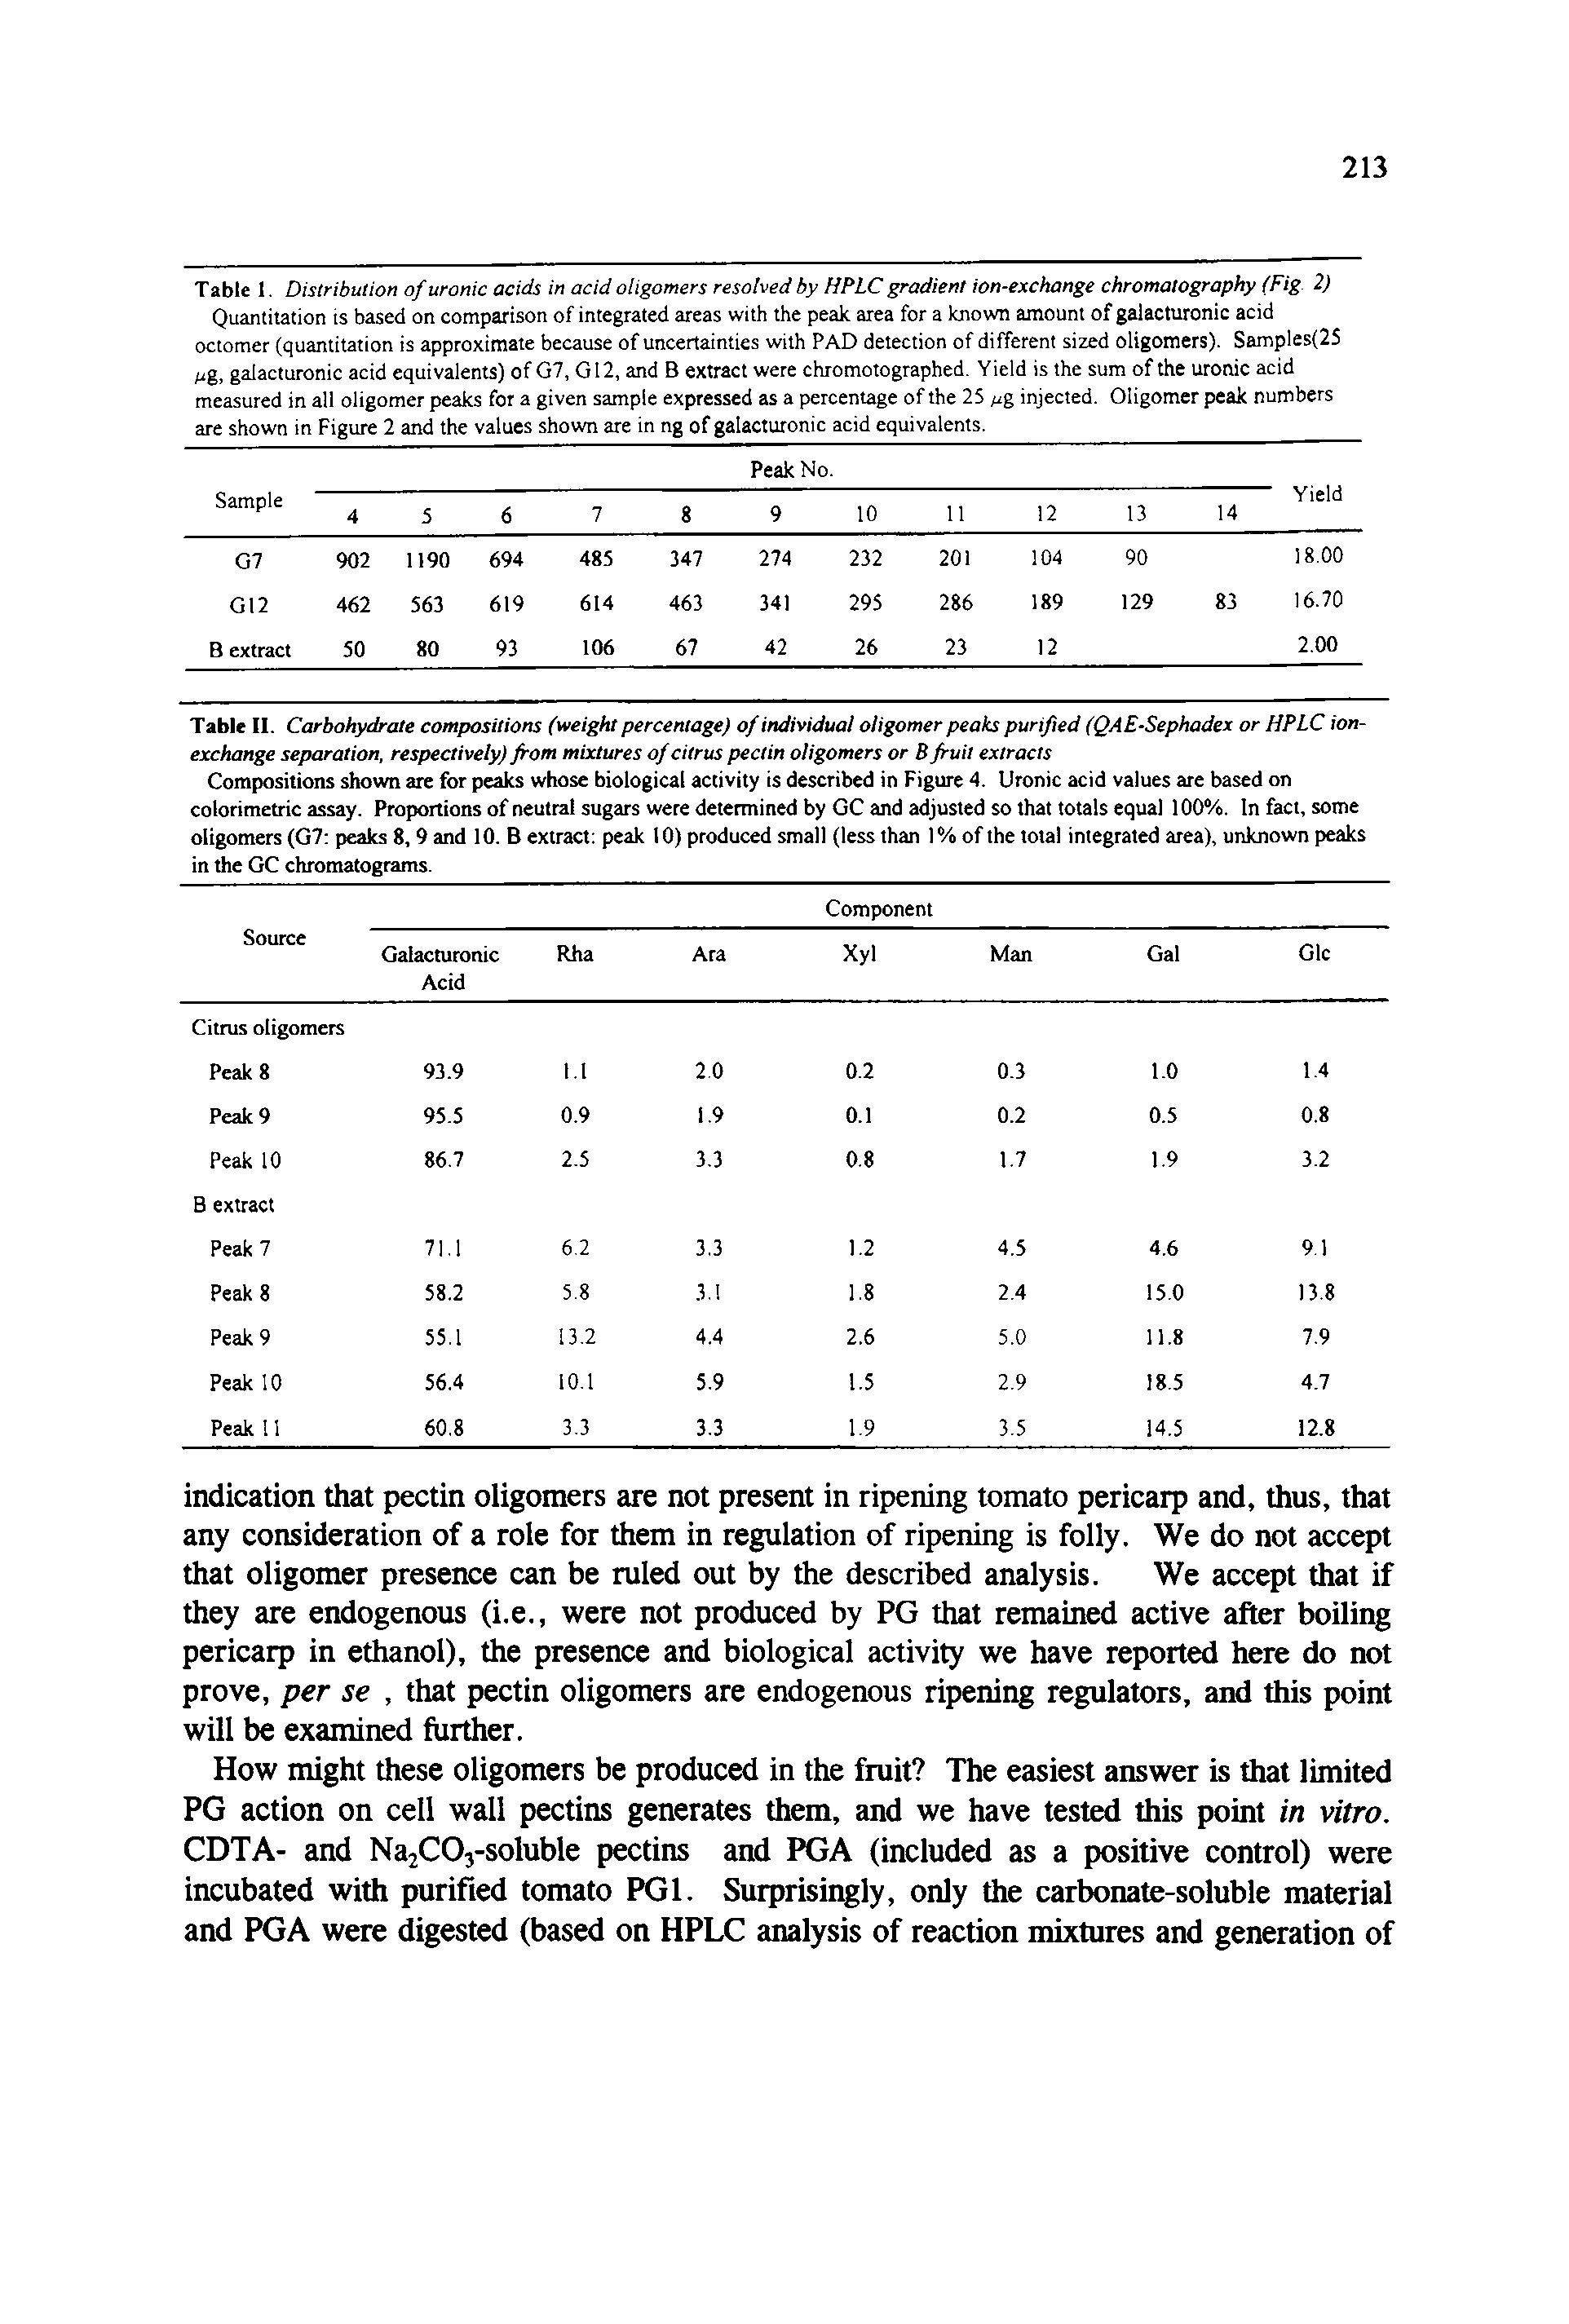 Table II. Carbohydrate compositions (weight percentage) of individual oligomer peaks purified (QAE-Sephadex or HPLC ion-exchange separation, respectively) from mixtures of citrus pectin oligomers or B fruit extracts Compositions shown are for peaks whose biological activity is described in Figure 4. Uronic acid values are based on colorimetric assay. Proportions of neutral sugars were determined by GC and adjusted so that totals equal 100%. In fact, some oligomers (G7 peaks 8, 9 and 10. B extract peak 10) produced small (less than 1 % of the total integrated area), unknown peaks in the GC chromatograms.